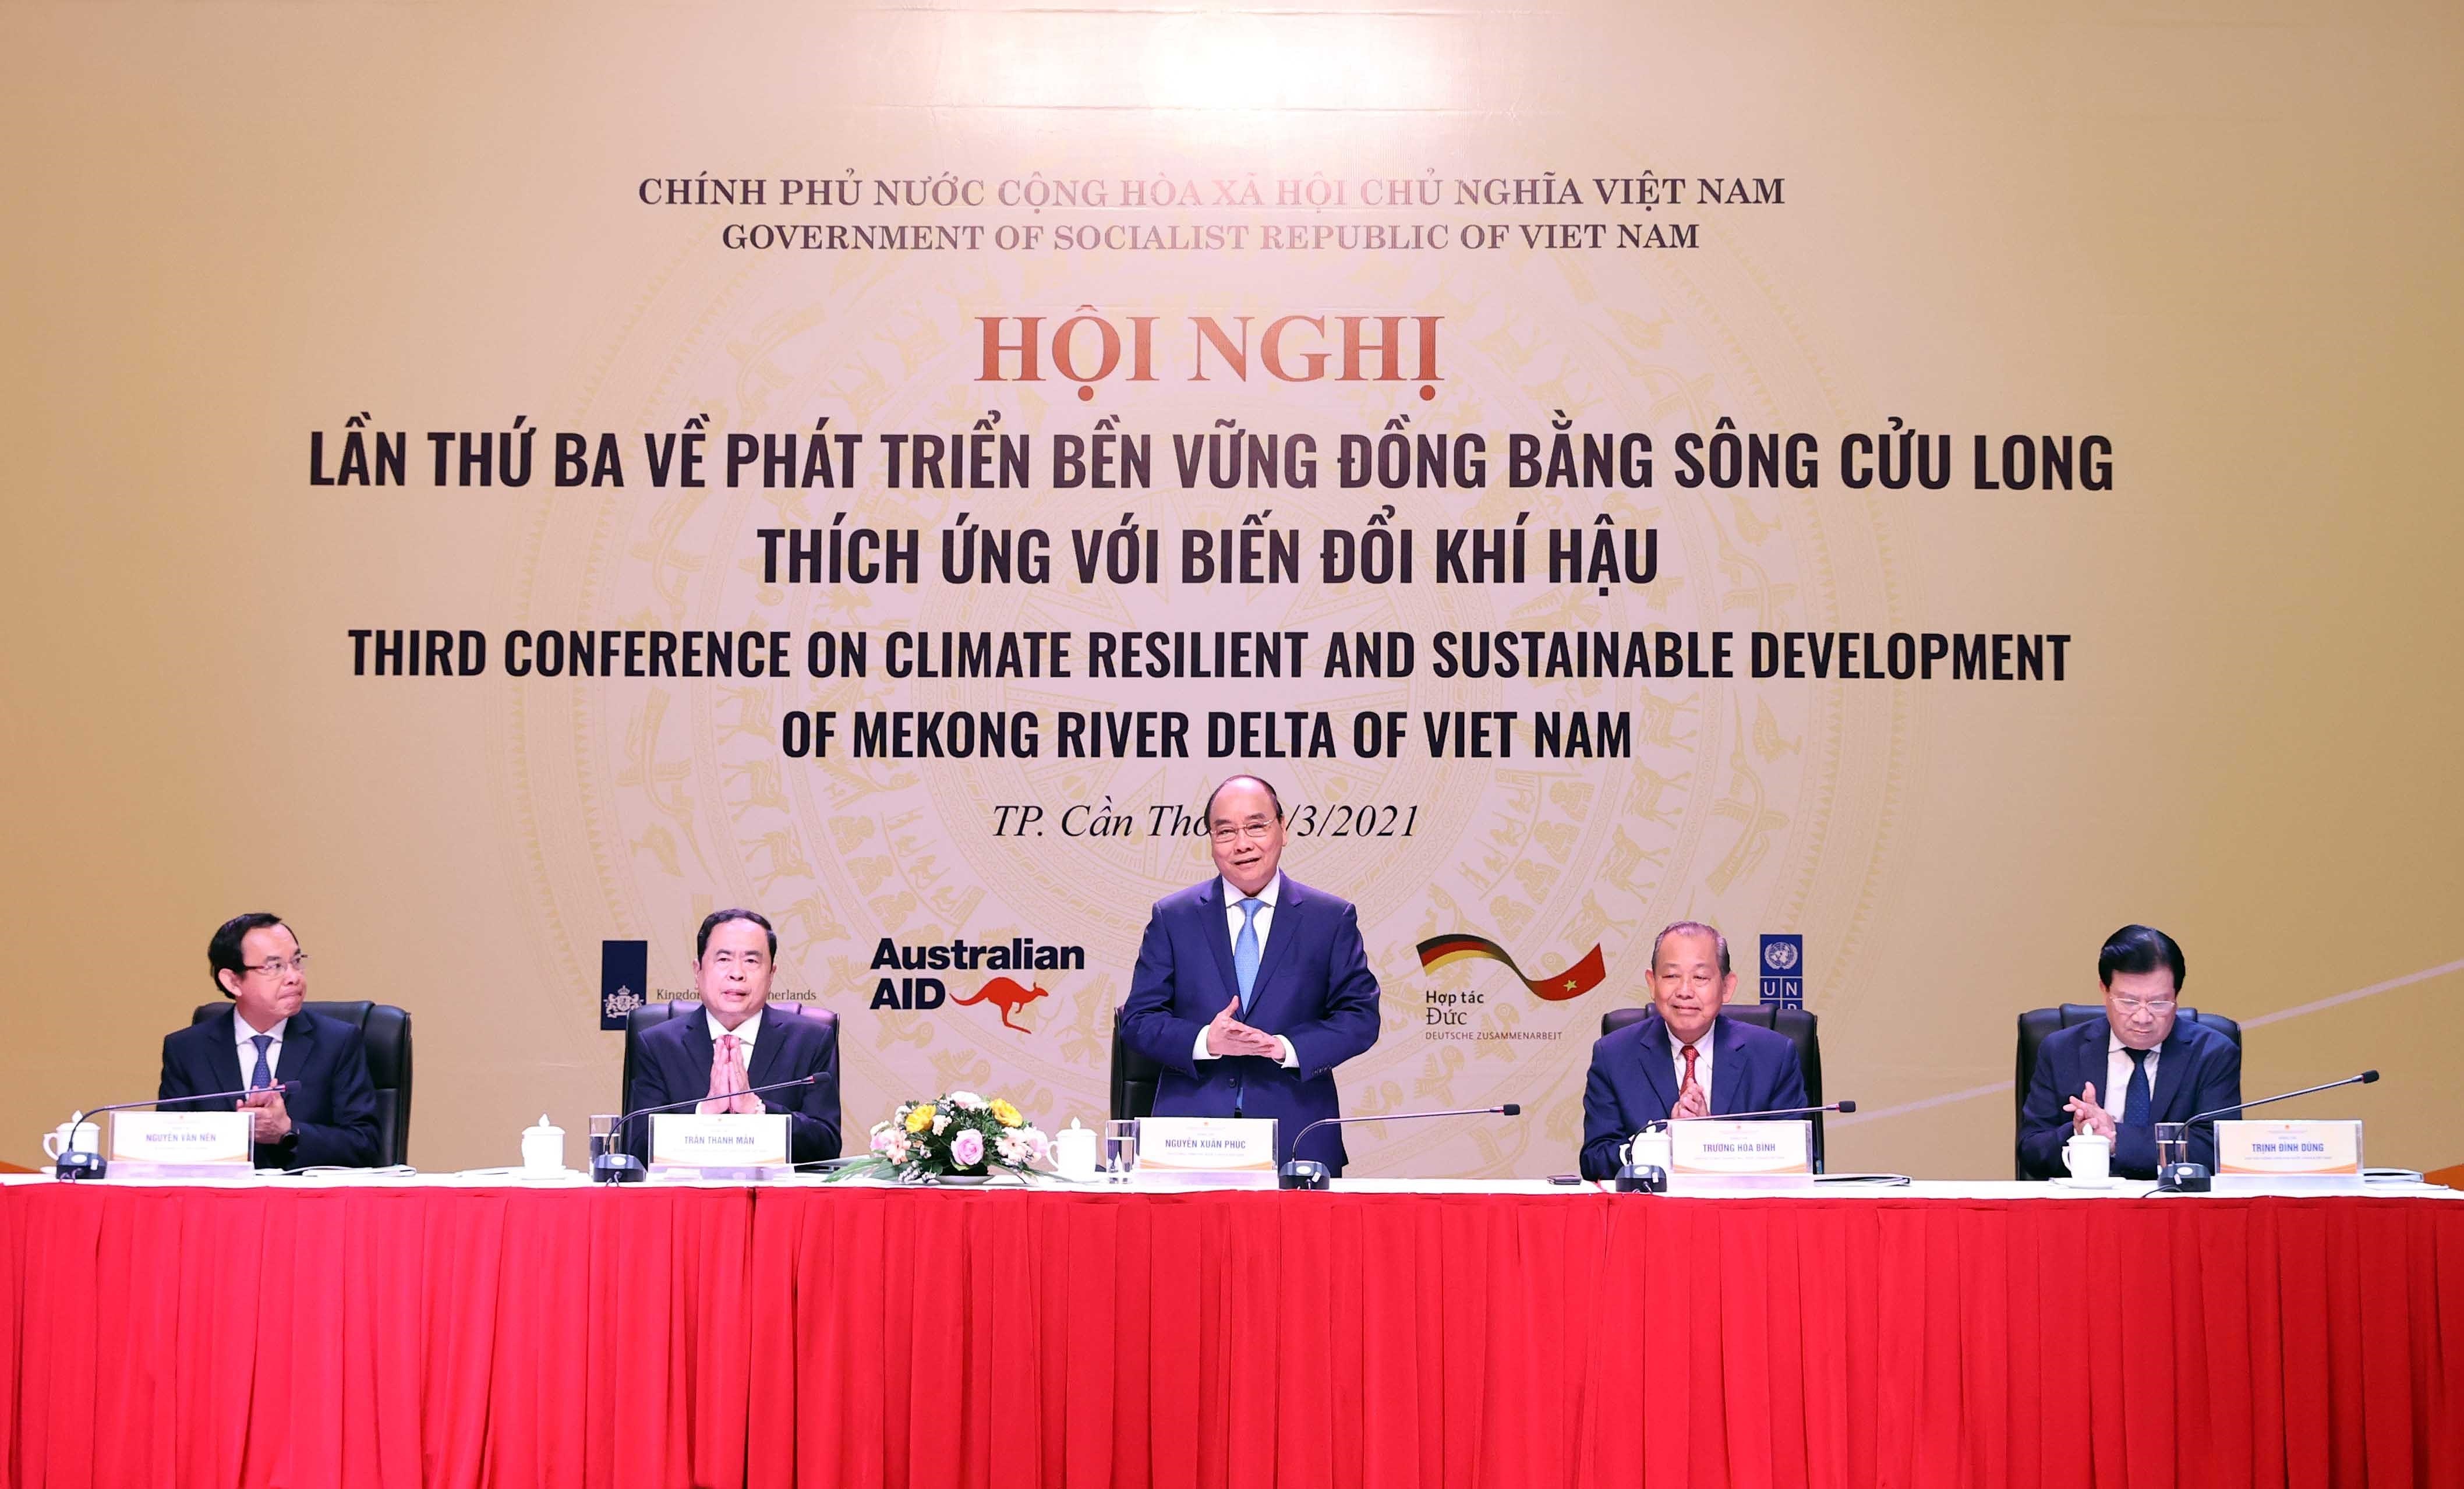 Third conference held to discuss sustainable development of Mekong Delta hinh anh 1